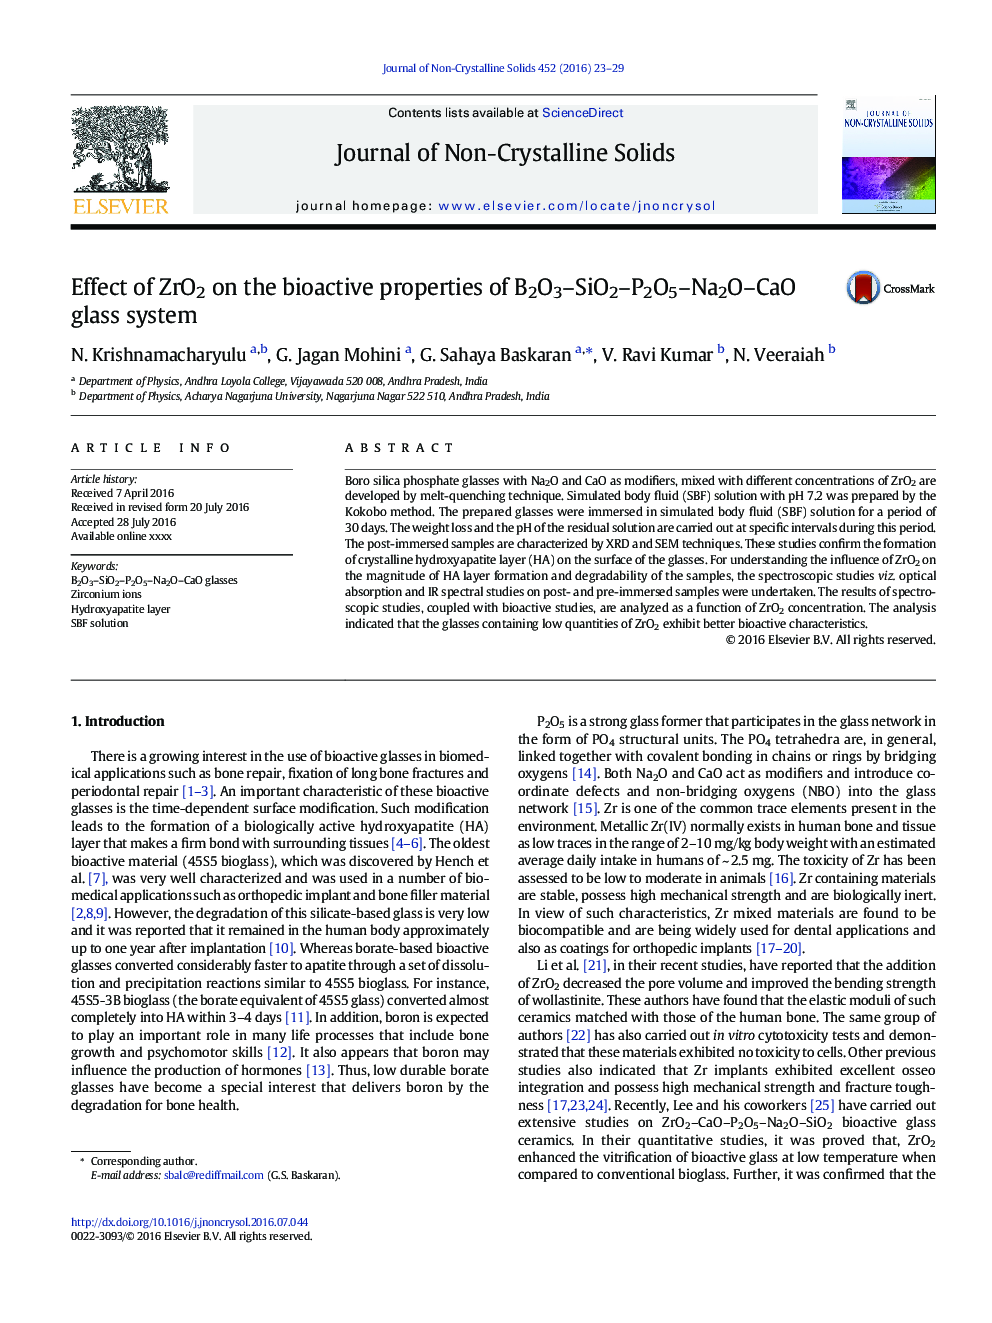 Effect of ZrO2 on the bioactive properties of B2O3–SiO2–P2O5–Na2O–CaO glass system